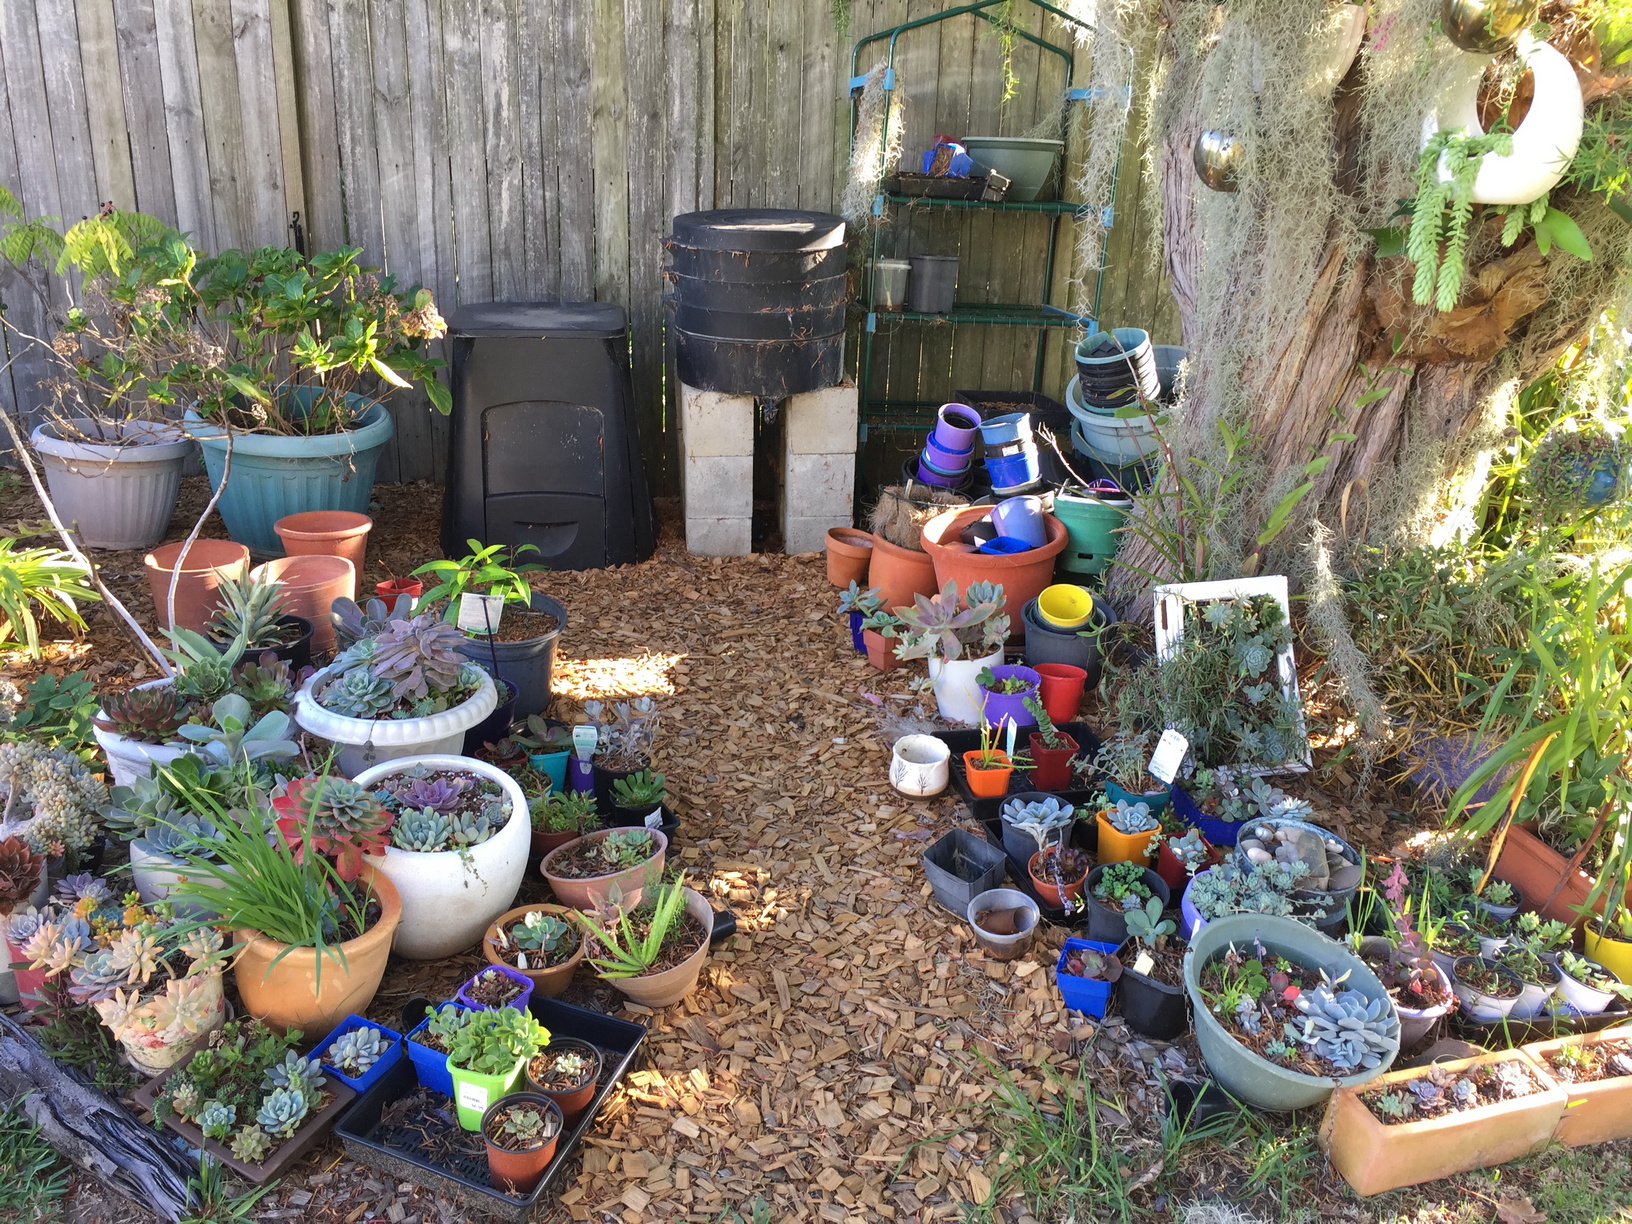 The compost bin and worm farm. The legs of the worm farm gave way a few years ago, so I have it sitting on some cinder-blocks. It works better as I can fit a watering can underneath now to drain out the worm wee. A small portion of my wifes succulent collection is in the foreground.